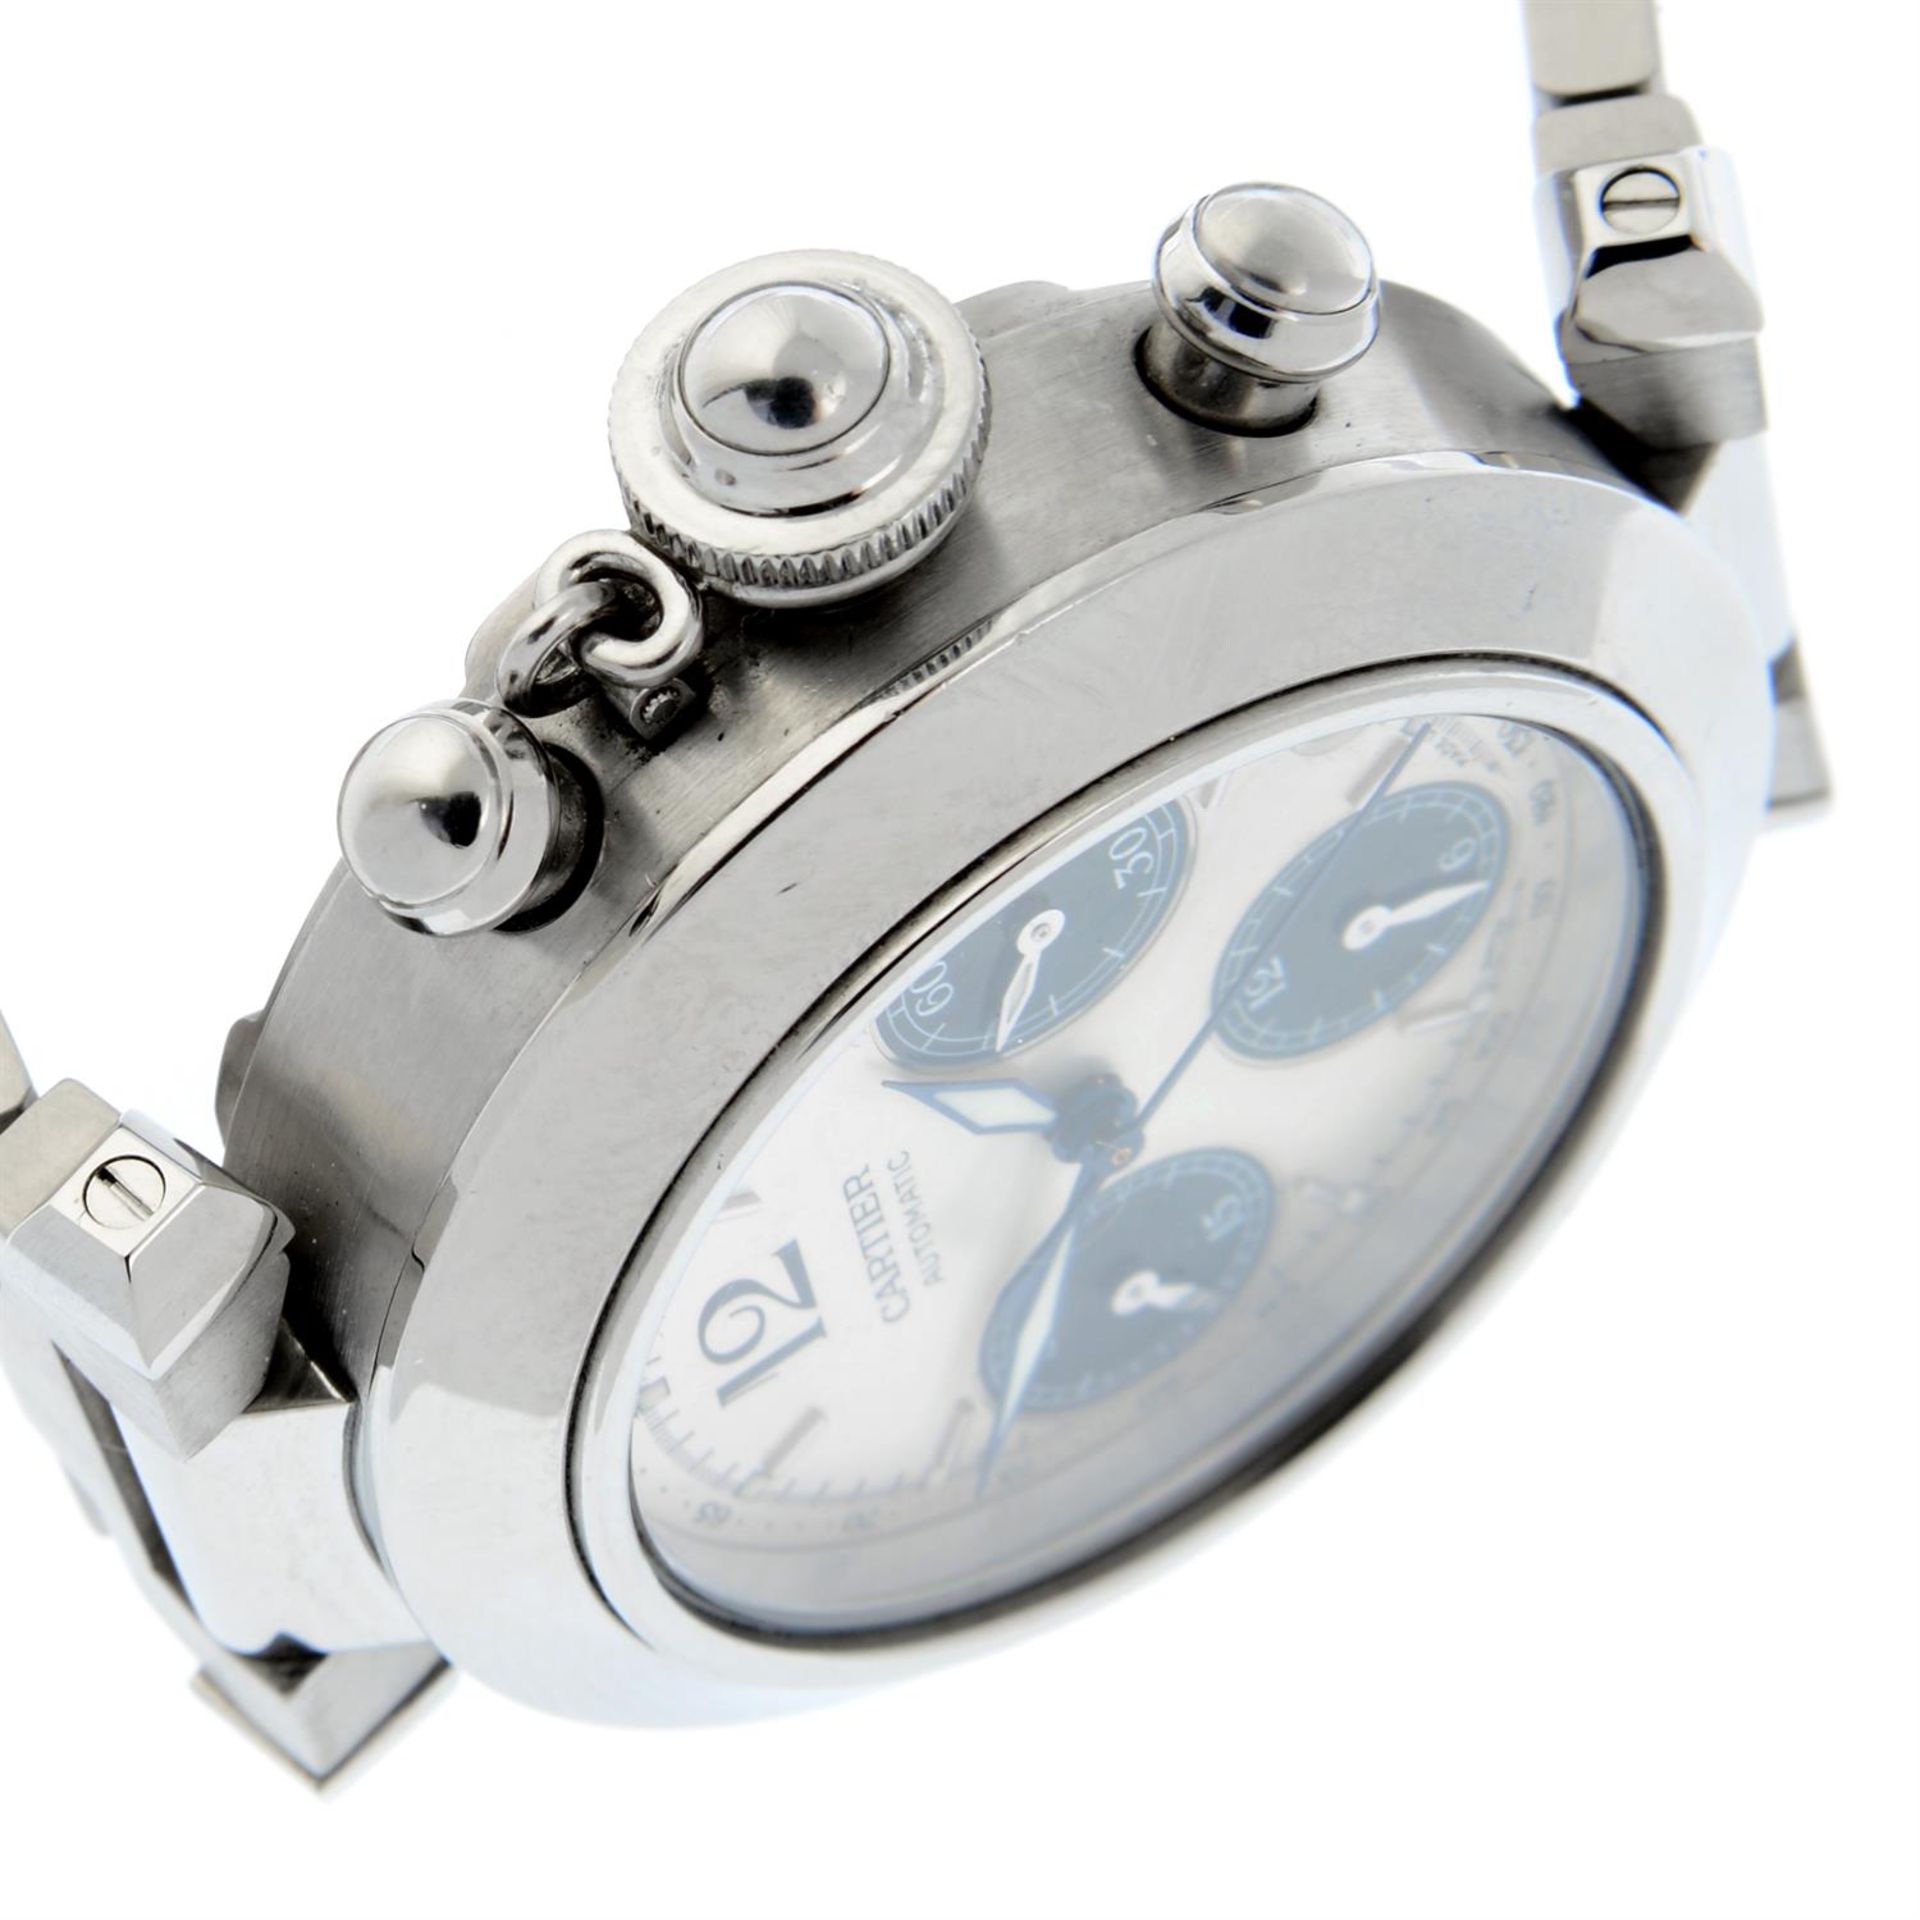 CARTIER - a stainless steel Pasha chronograph bracelet watch, 41mm. - Image 3 of 5